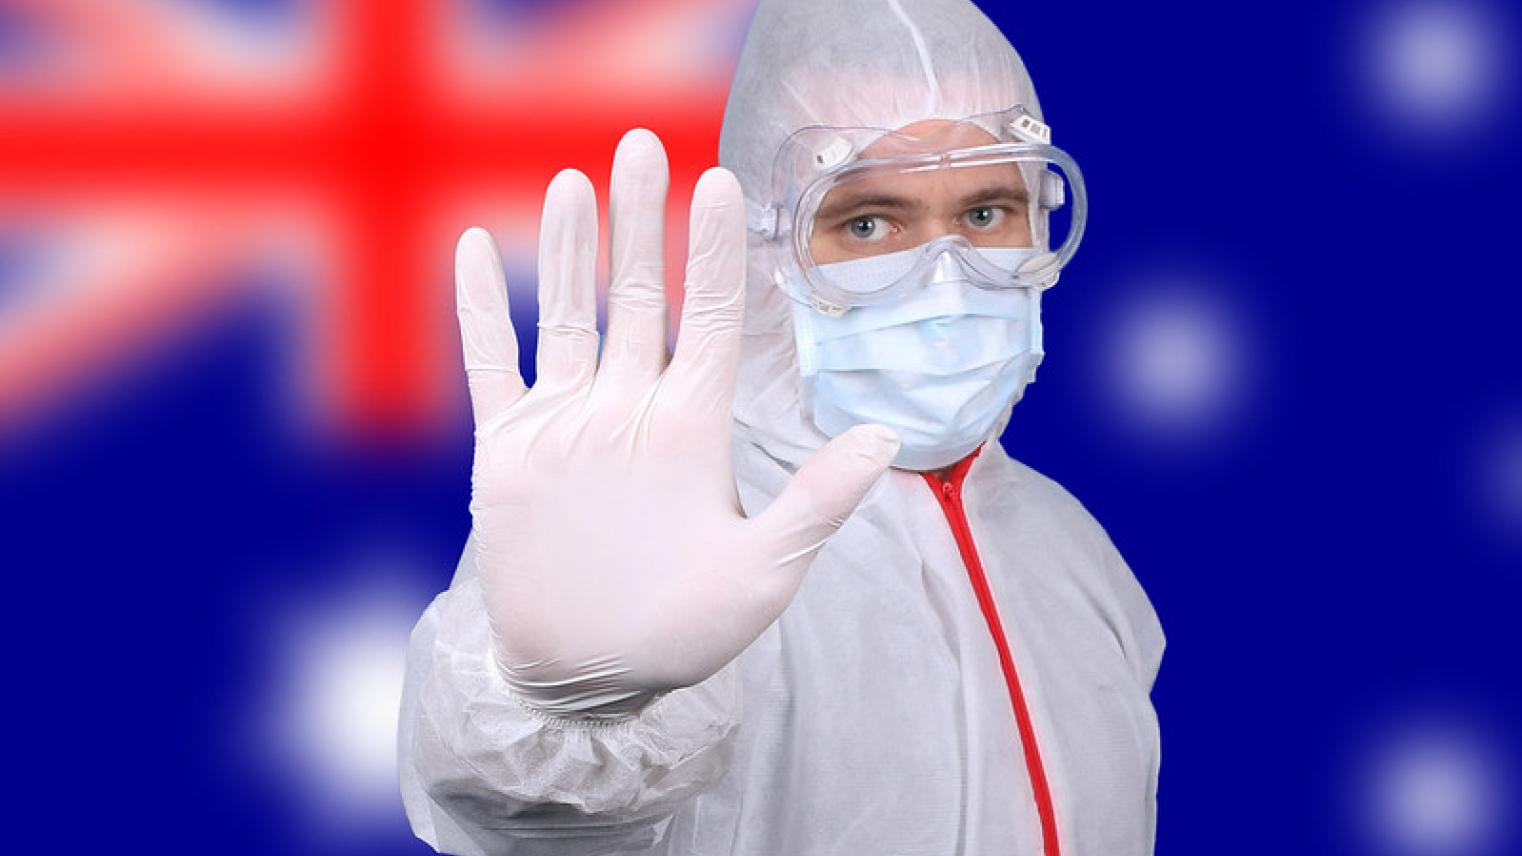 Worker in PPE with Australian flag background by Jernej Furman at https://flic.kr/p/2iNQNsV (CC BY 2.0)